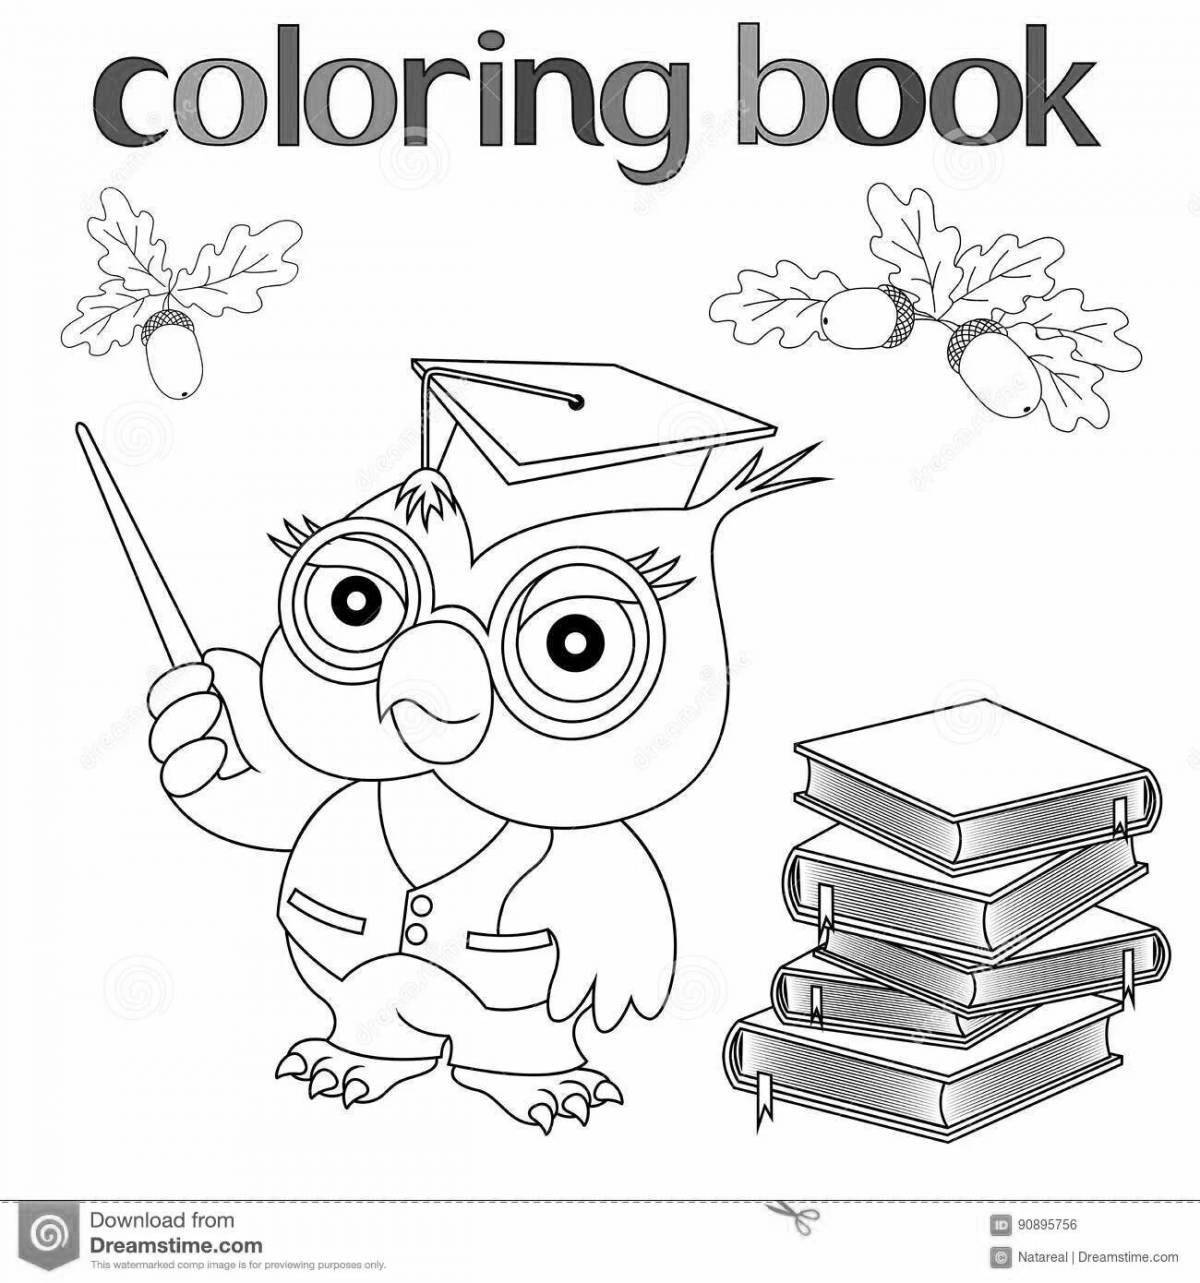 Elegant coloring owl with books